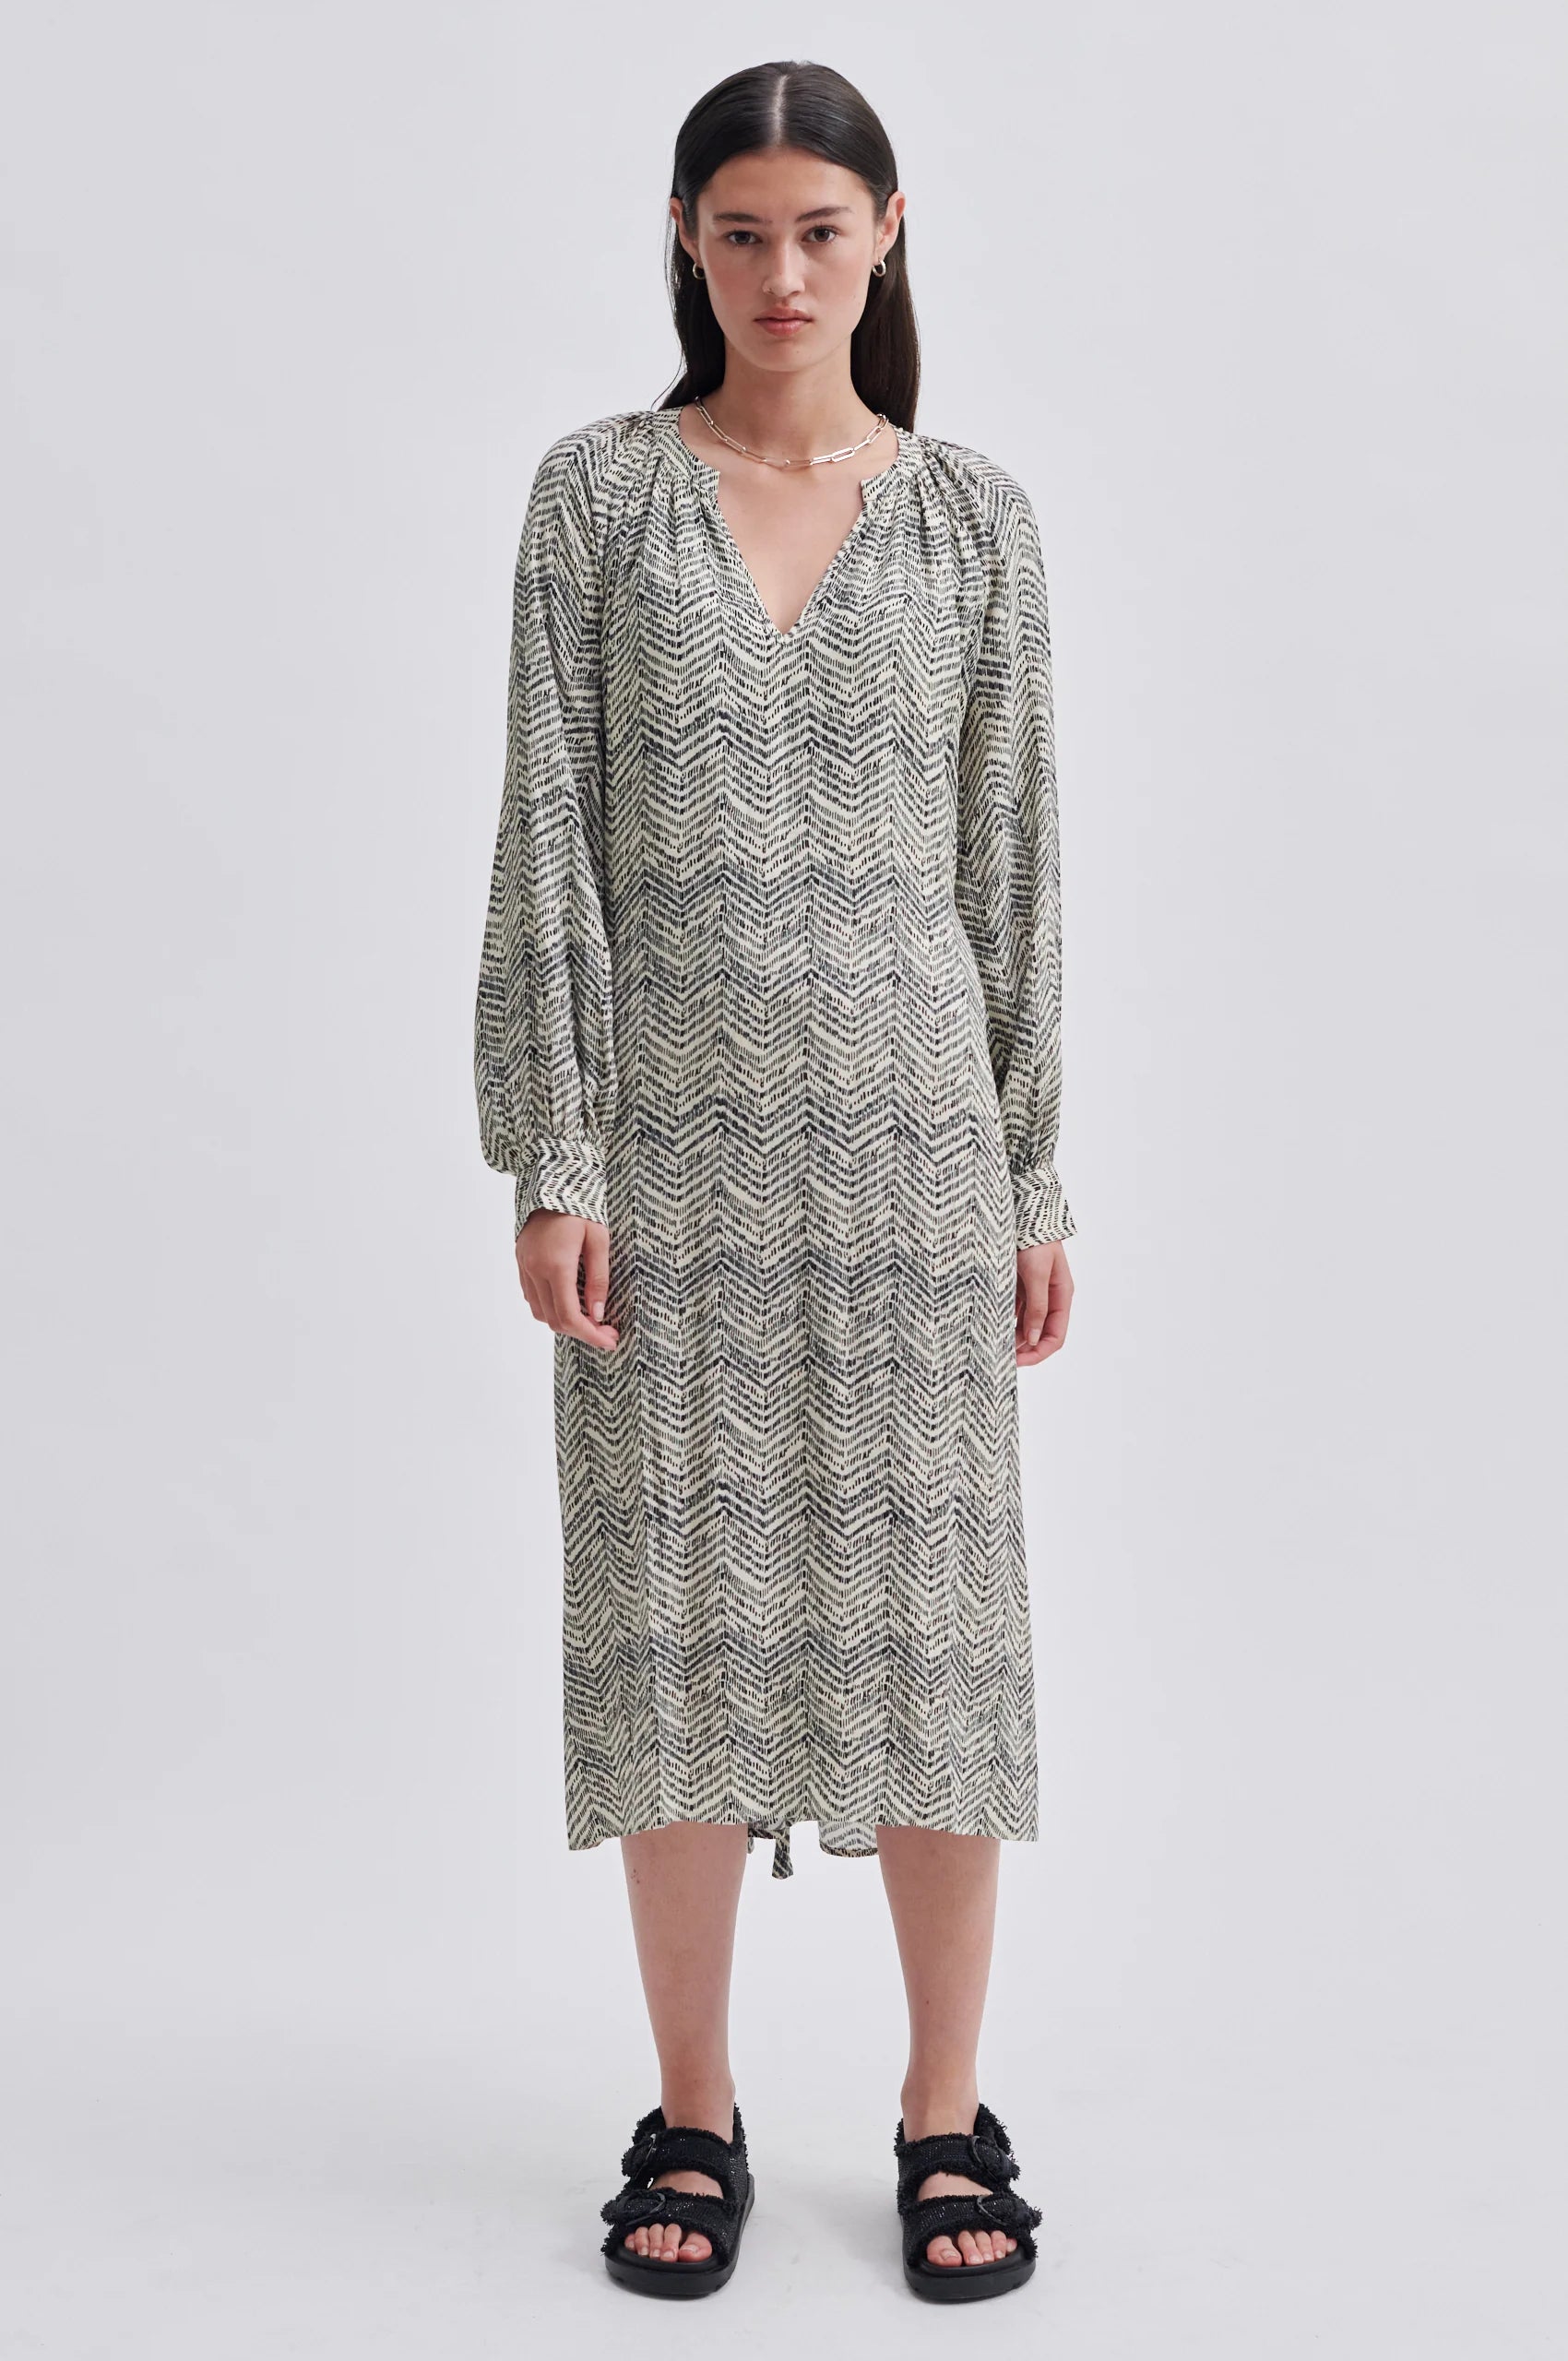 Notch neck midi dress with long gathered sleeves fabric self tie belt and ecru background with black zig zag printed fabric